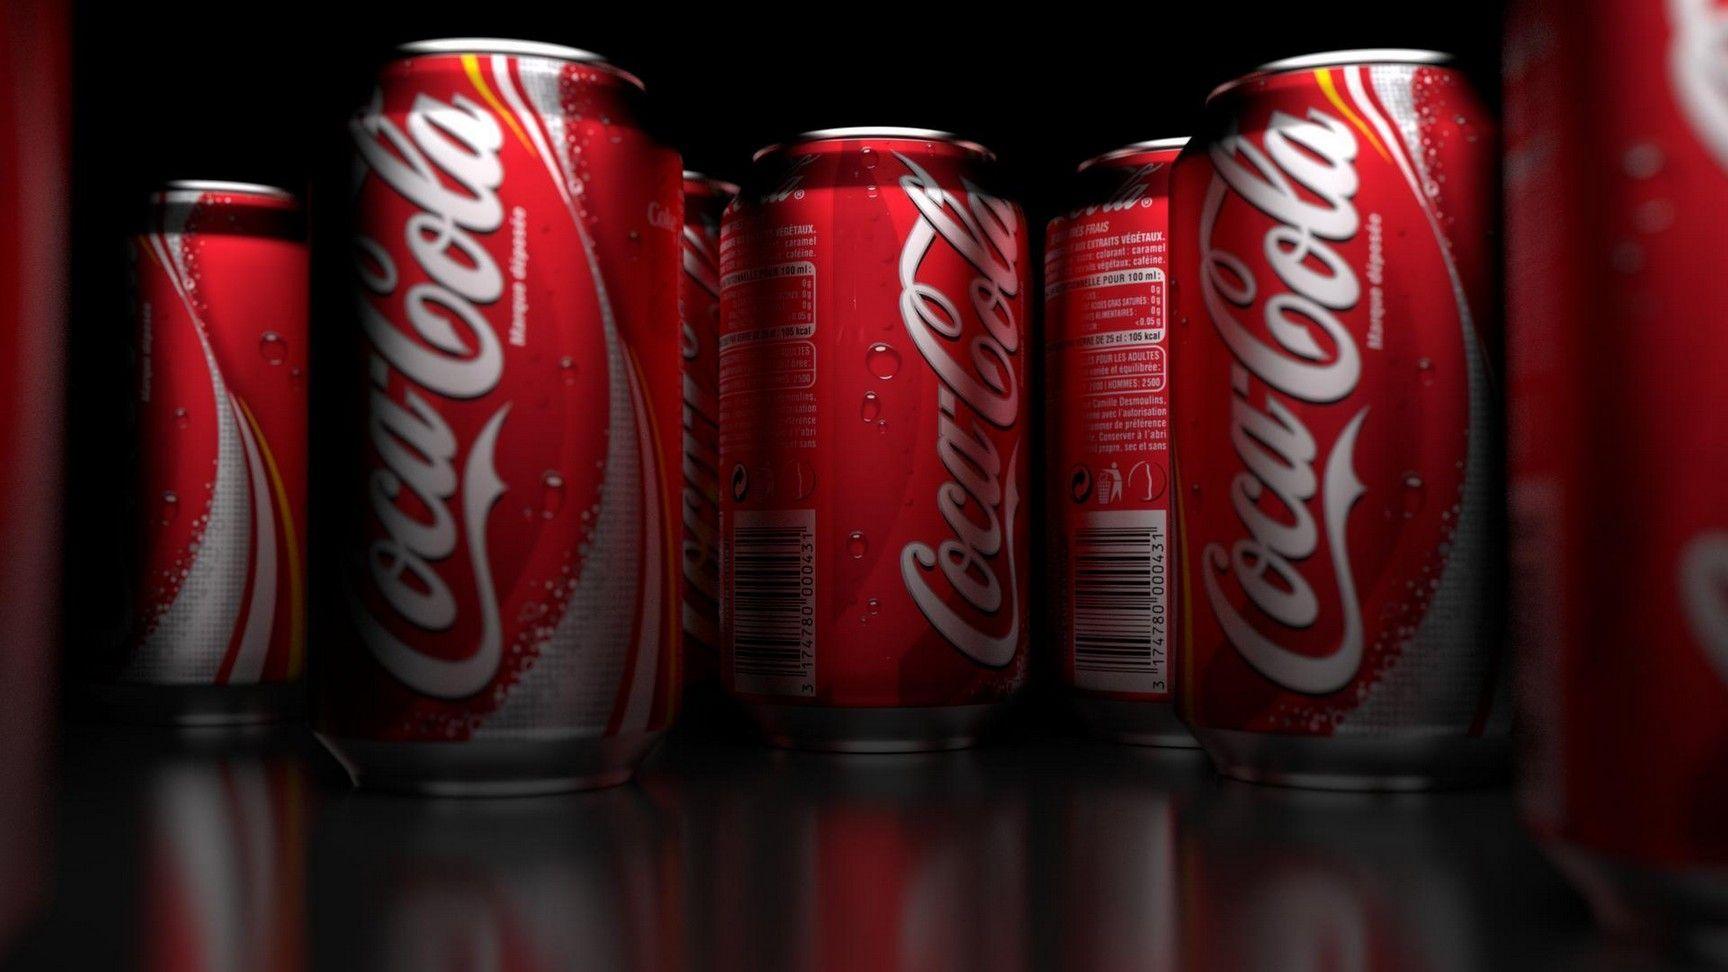 Hend Ahmed - Coca Cola 3D Advertising Poster ​​​​​​​​​​​​​​